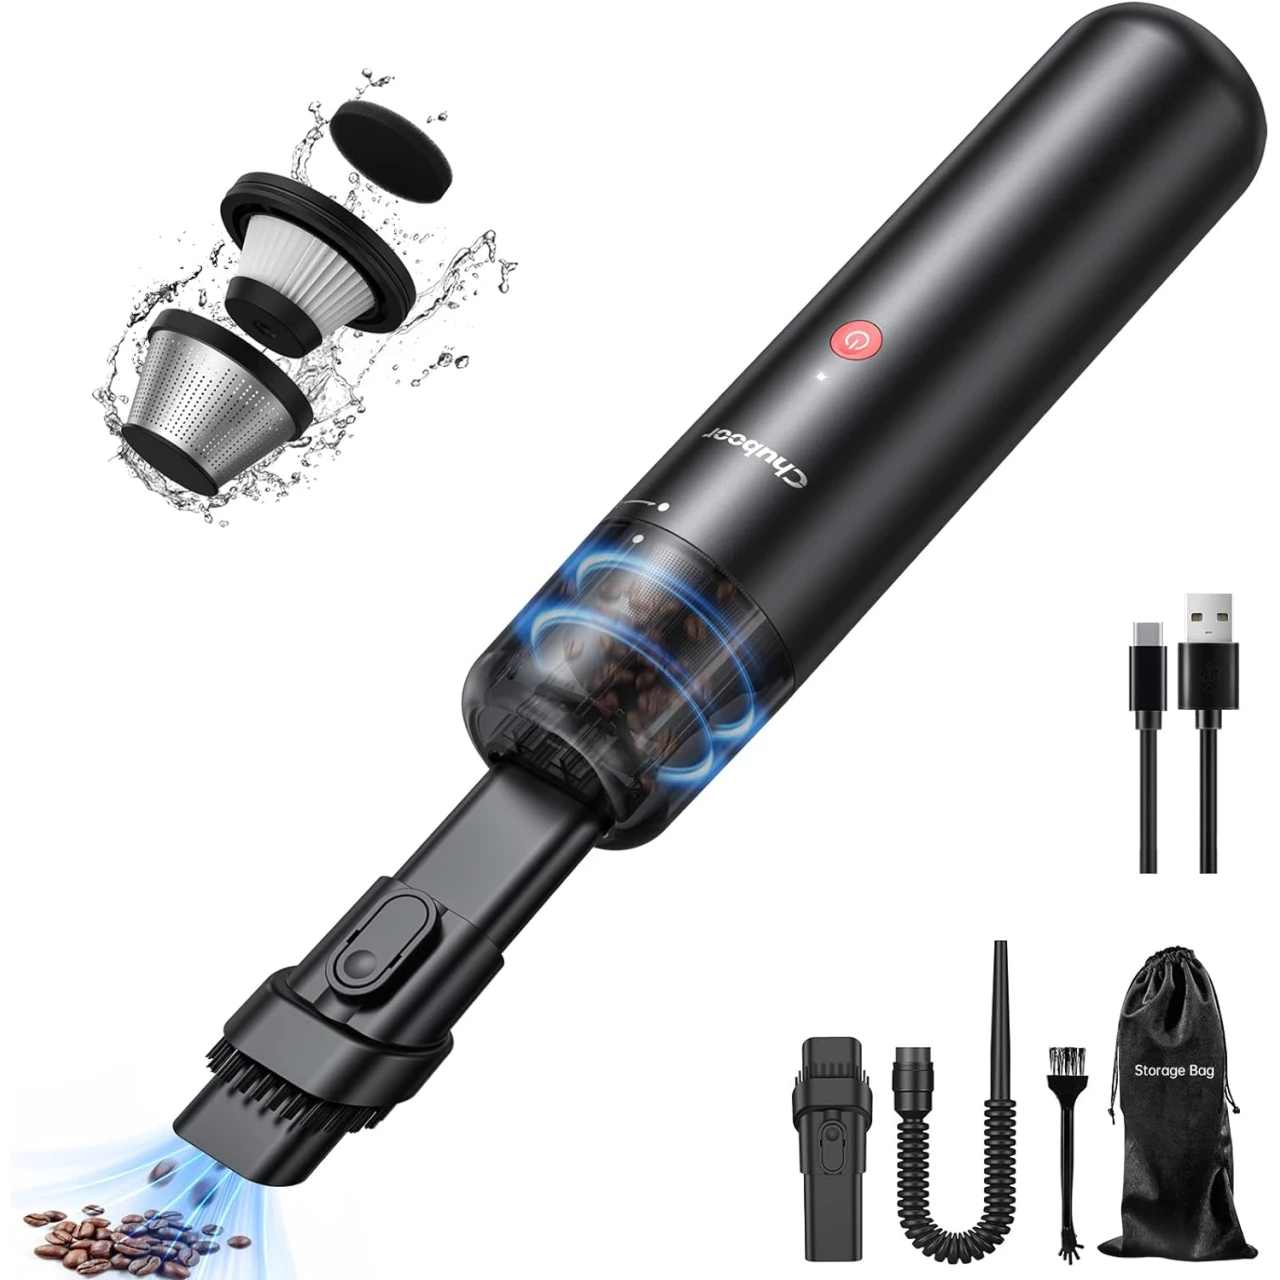 Chuboor Mini Vacuum, Powerful Car Vacuum Cordless Rechargeable, Hand Held Vacuum for Dust, Sand, Crumbs, Ultra-Light Portable Vacuum for Home, Car, Small Dust Buster